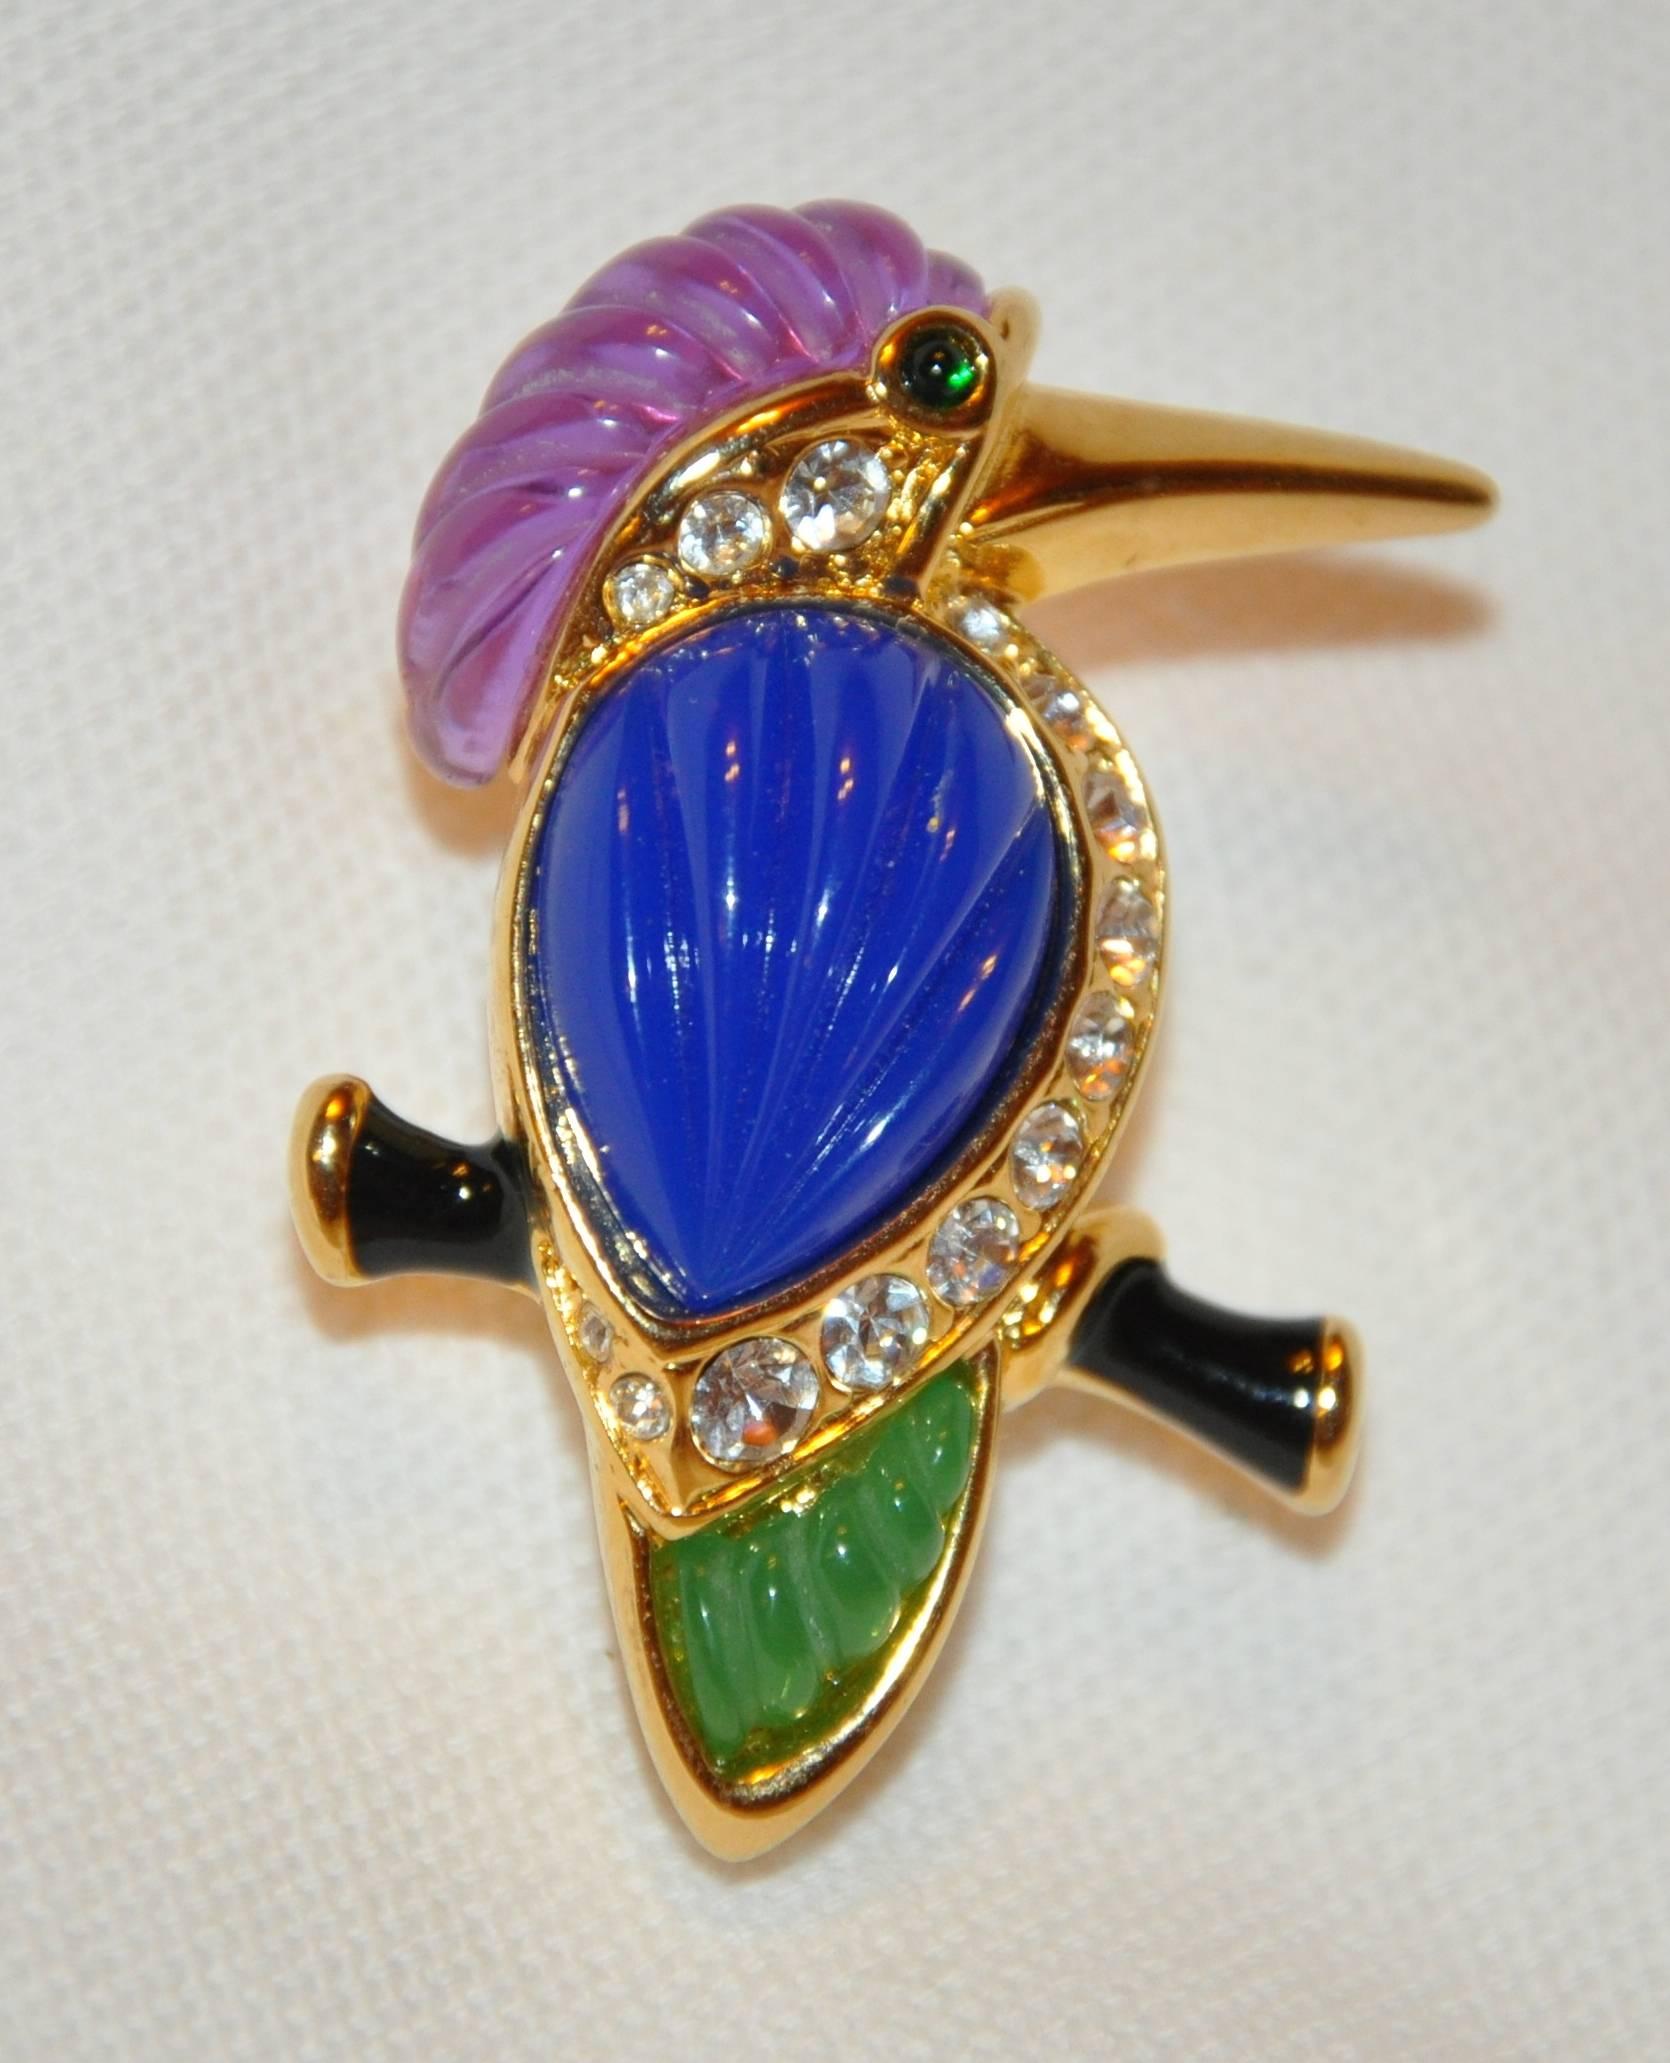        Kenneth Jay Lane wonderfully large whimsical multi-color "Bird" brooch set with faux lapis, faux emeralds, faux jadeite and lavender, as well as black enamel and accented with scattering of faux diamonds in gilded polished vermeil